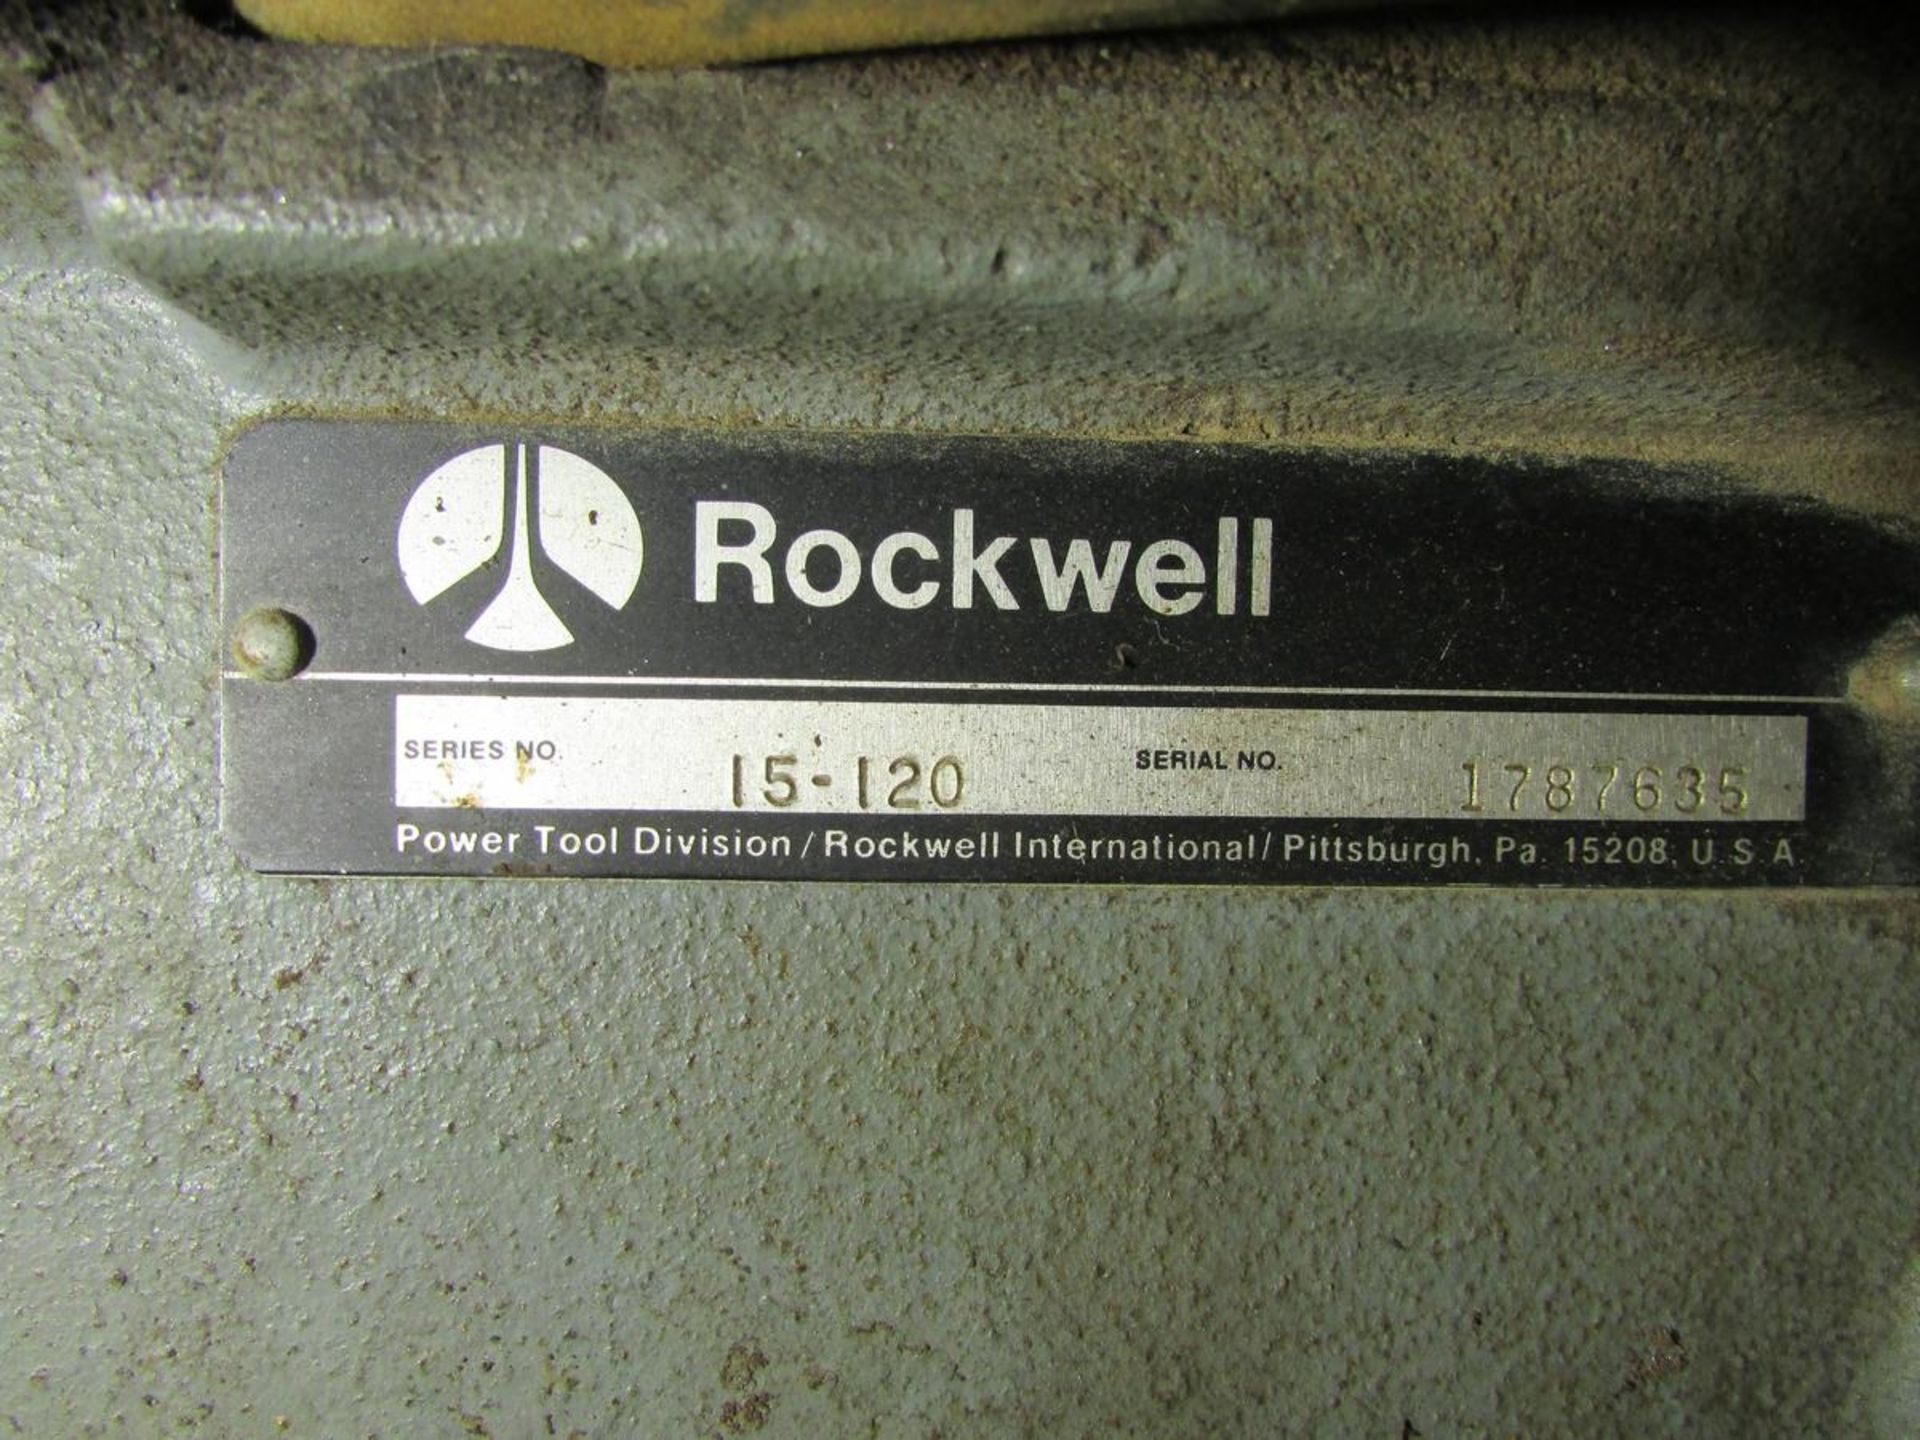 Rockwell Series No. 15-120 Radial Drill - Image 8 of 8